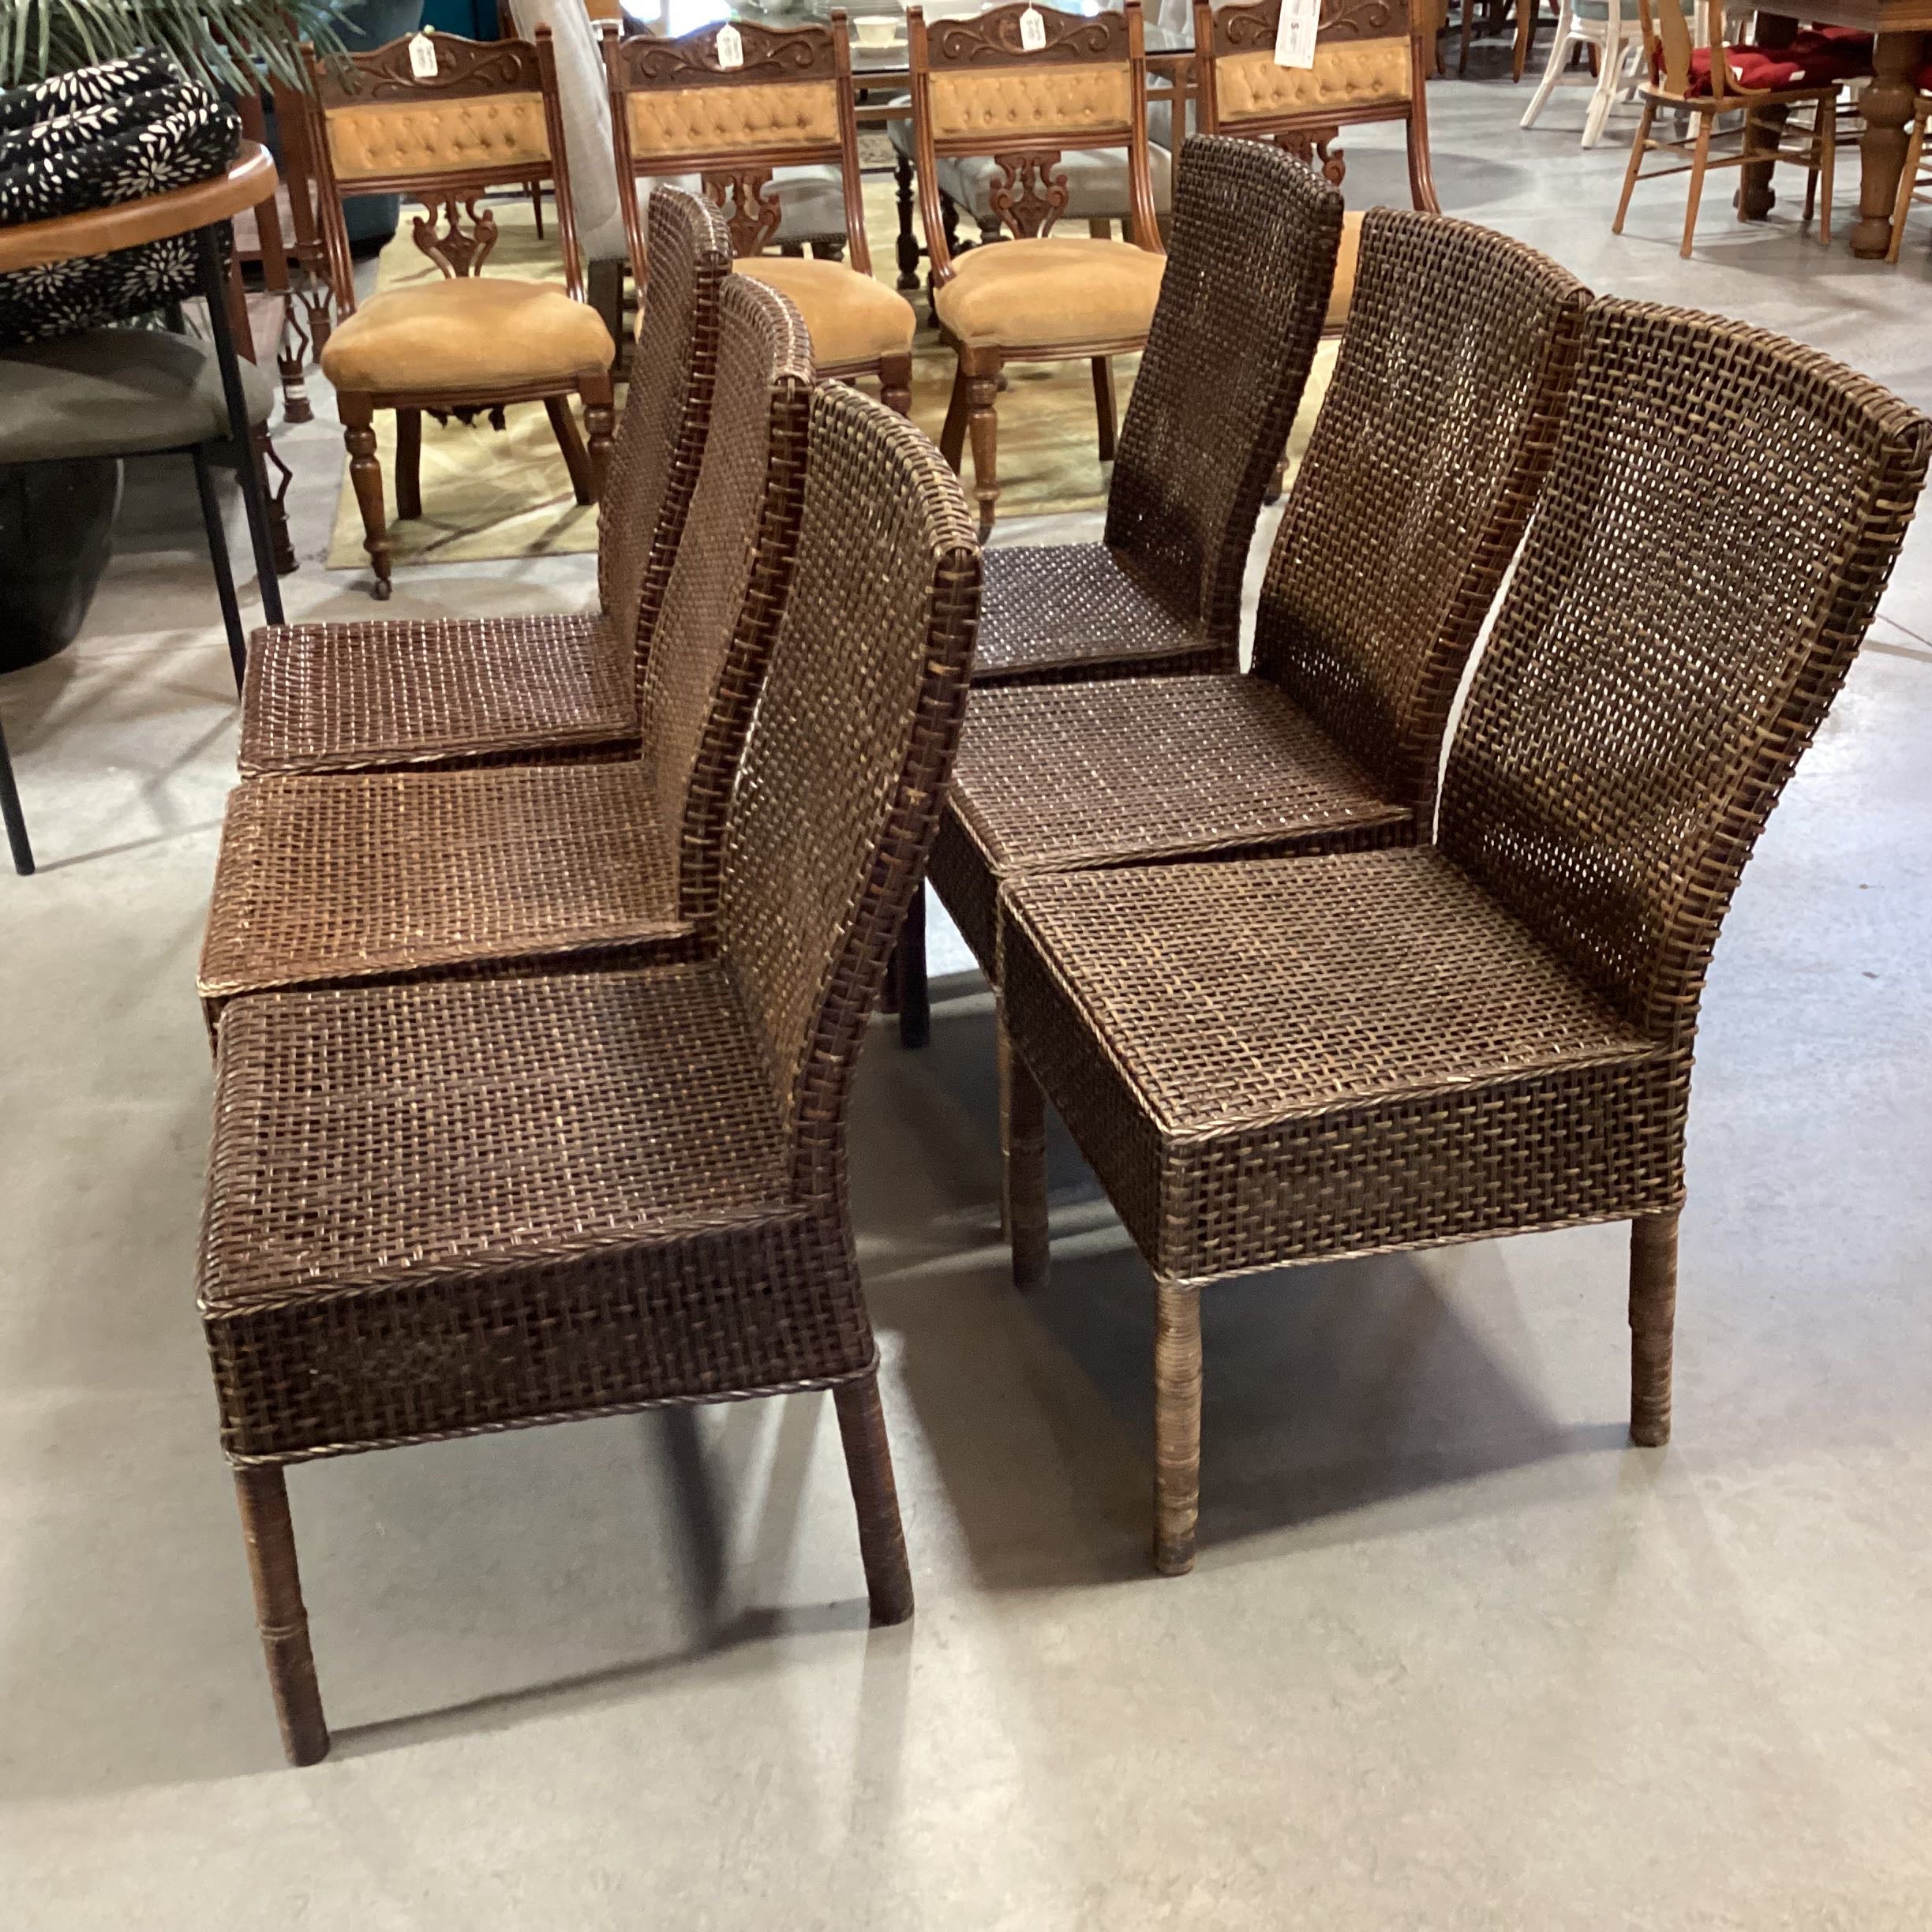 Set of 6 Wood and Wicker Woven Dining Chairs